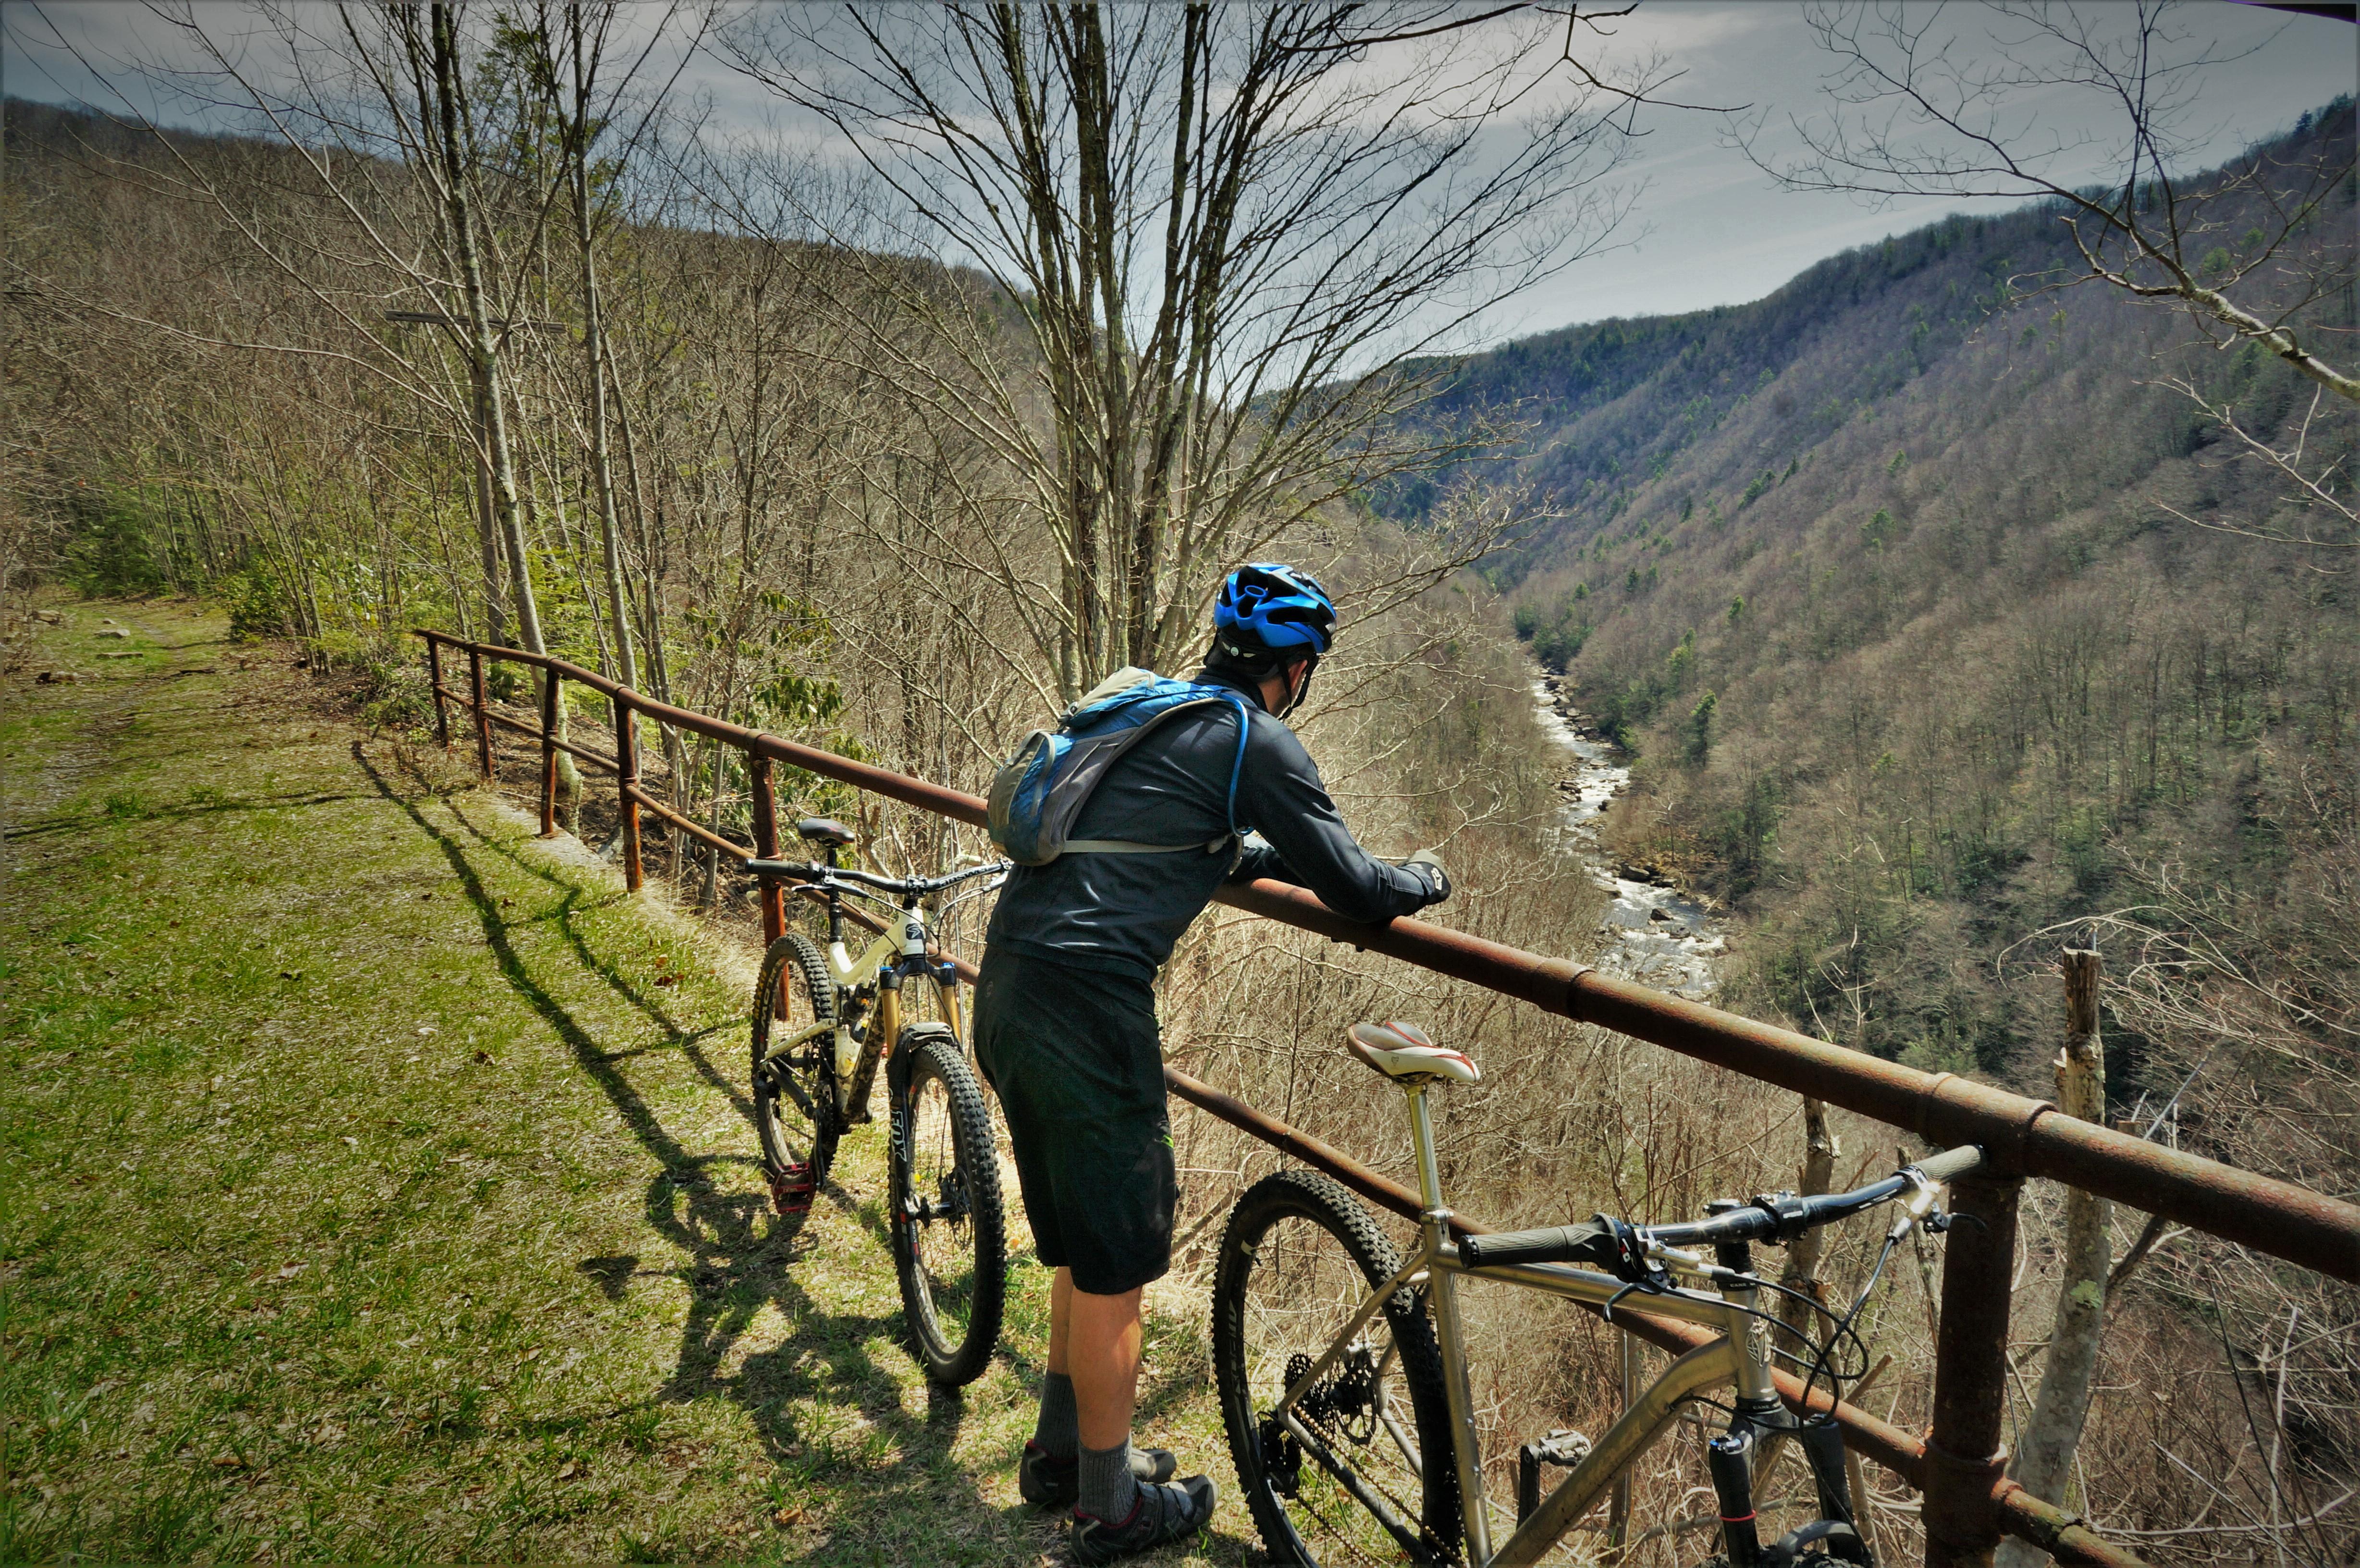 Overlook the Blackwater Canyon on the Allegheny Highlands Rail Trail